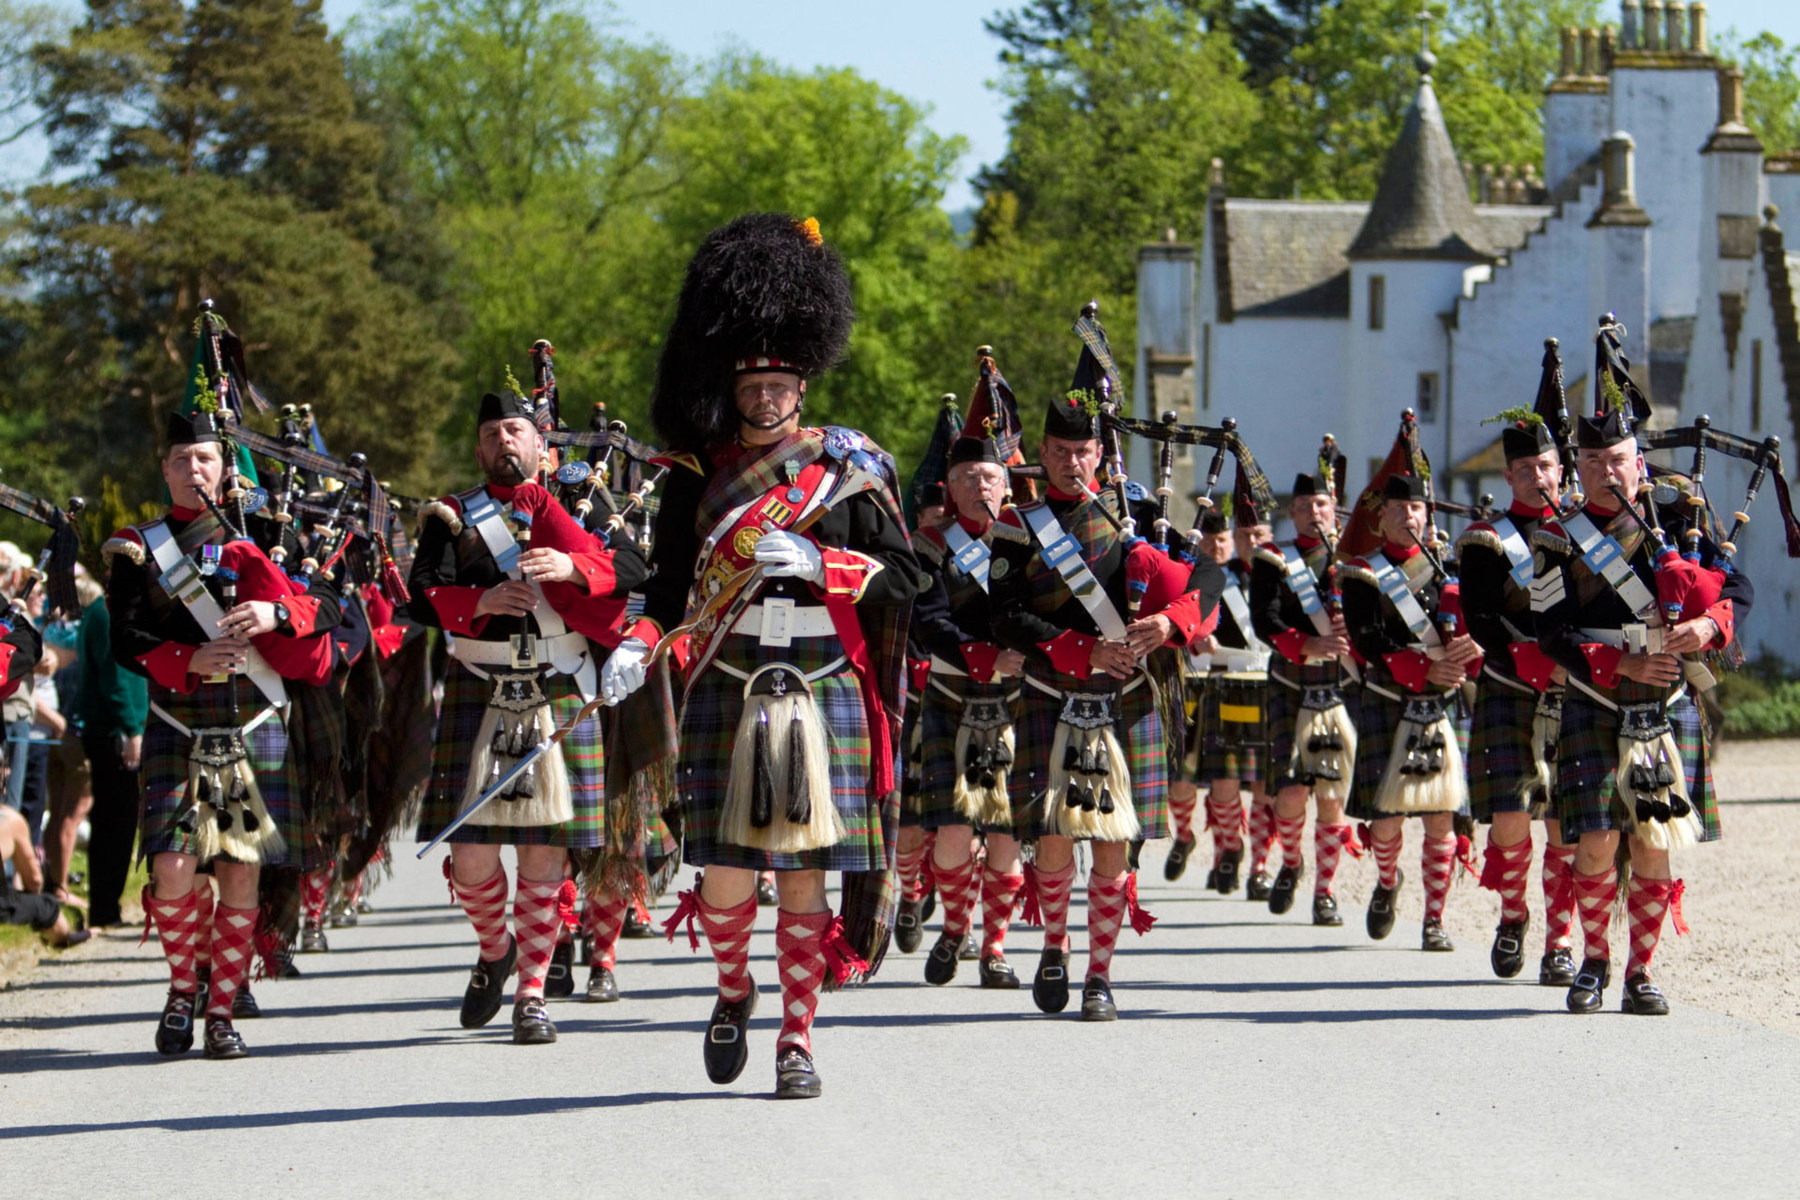 The Atholl Highlanders Parade held annually in May at Blair Castle